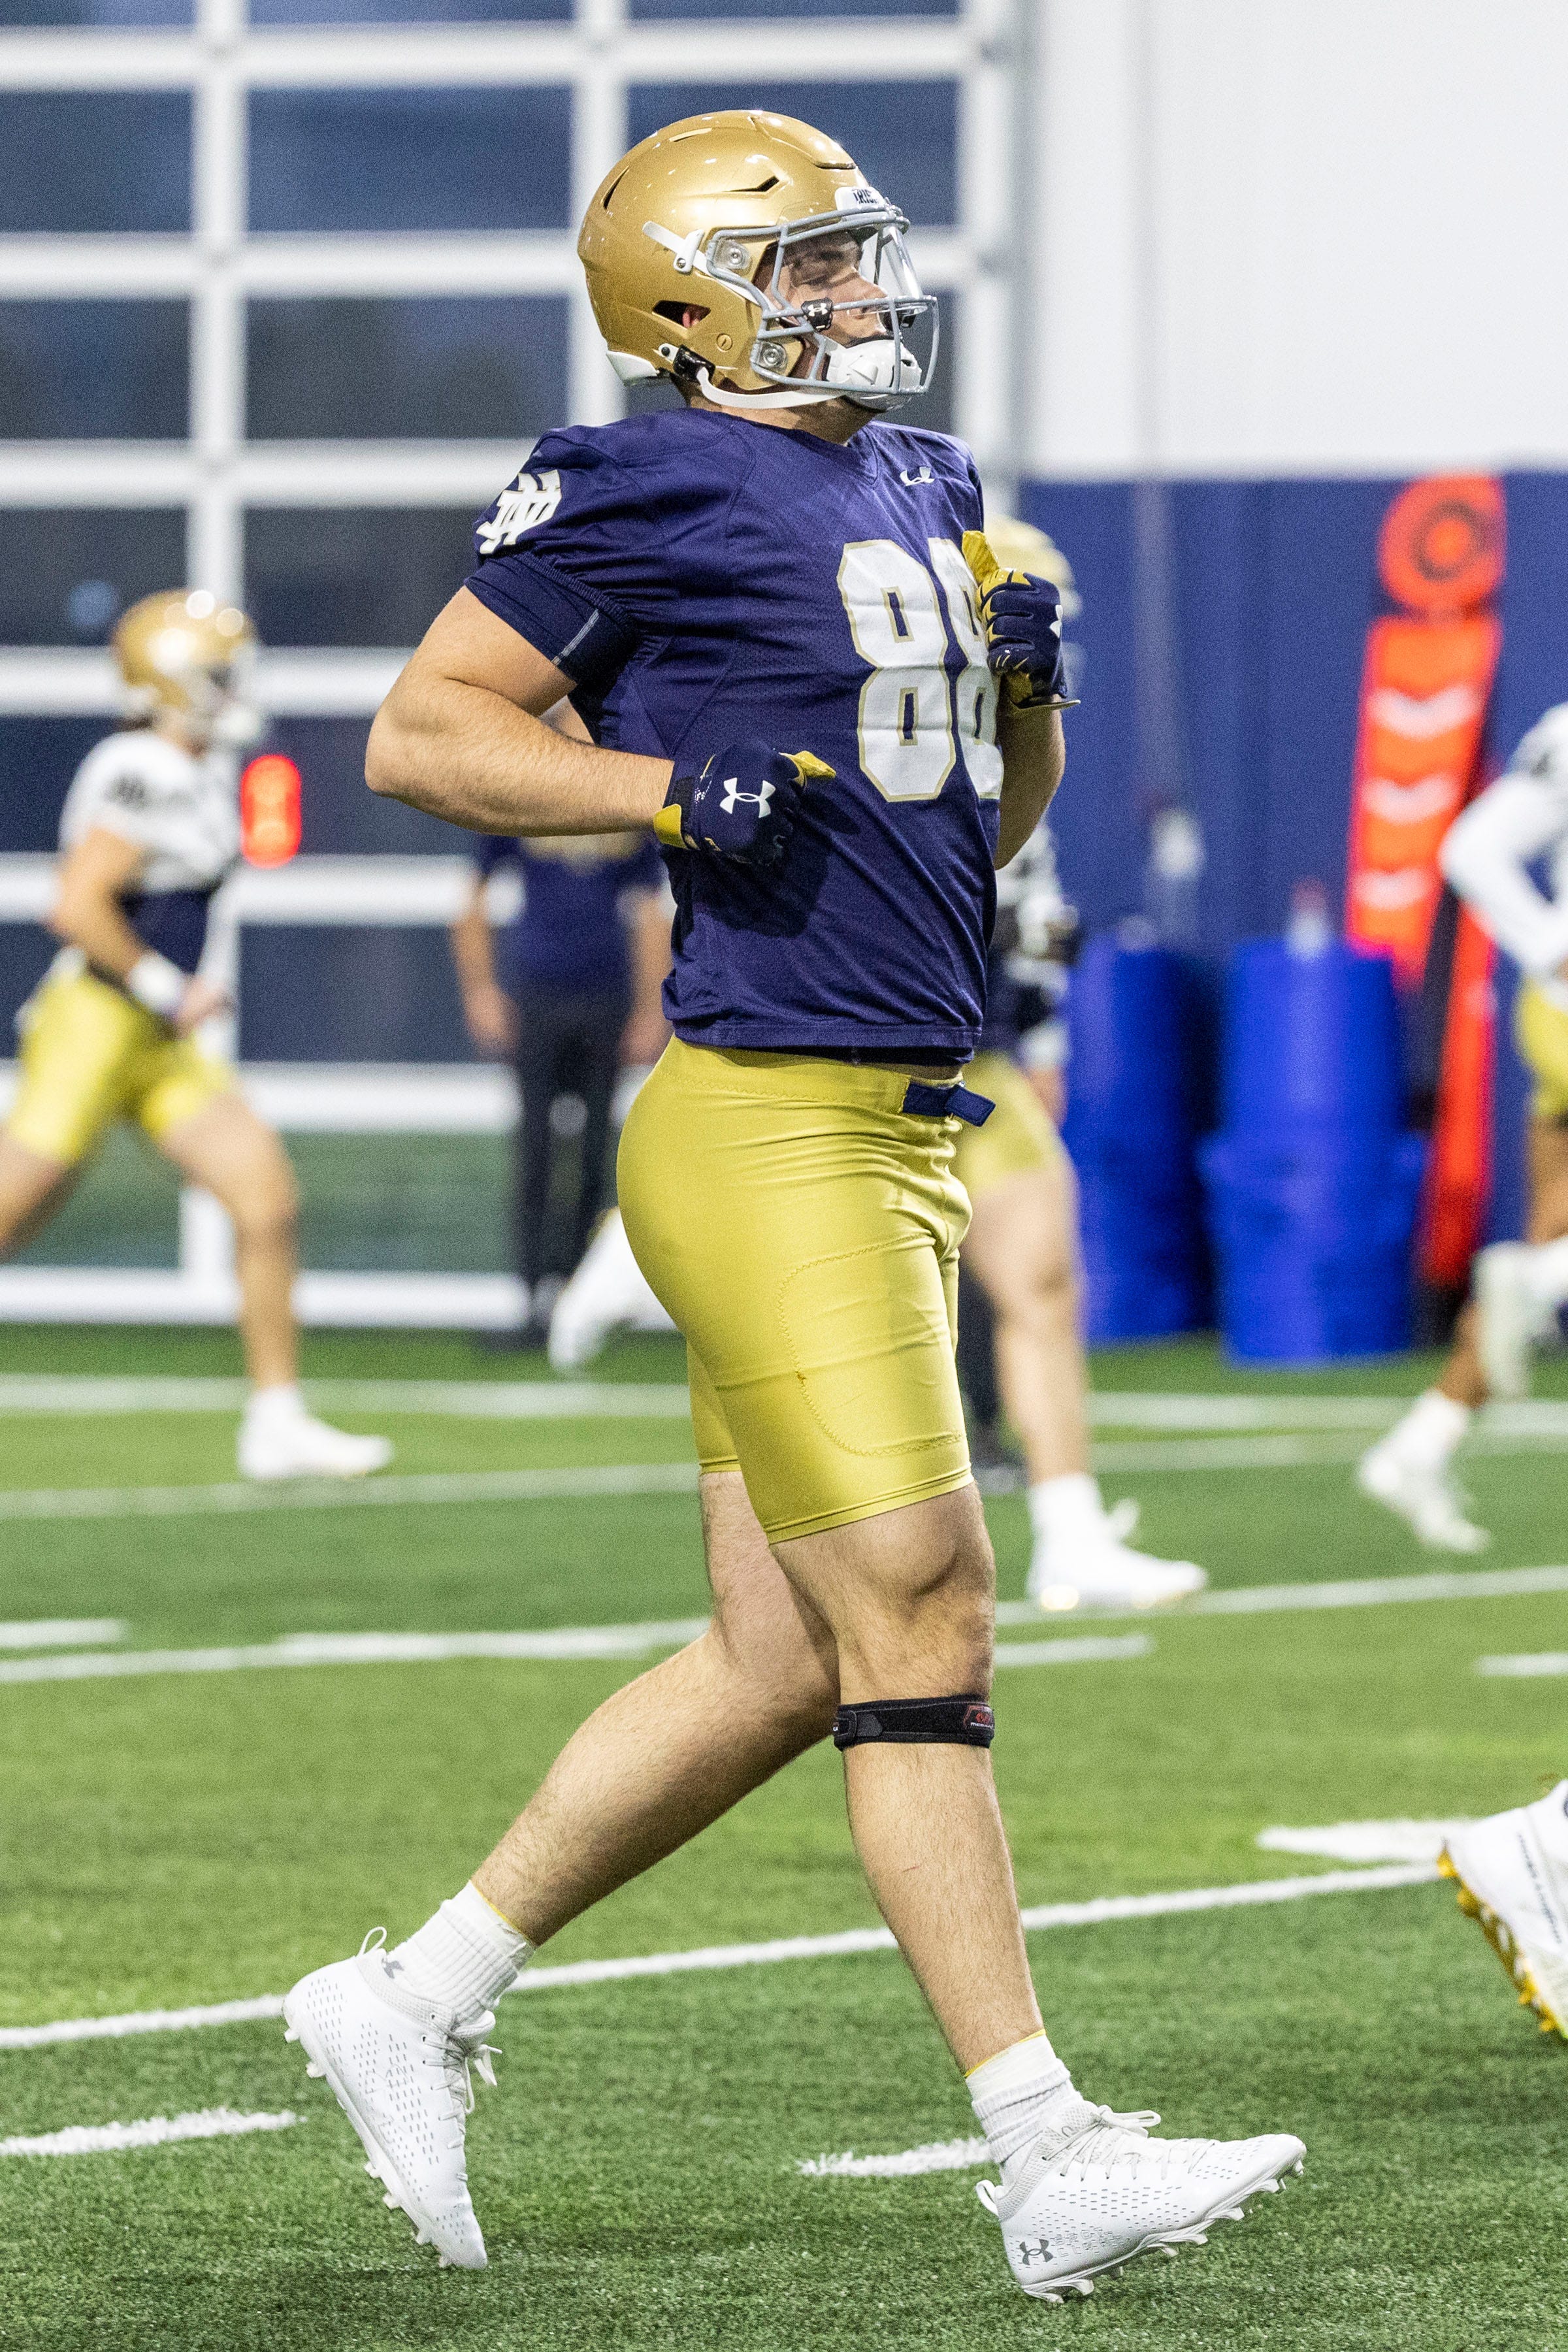 Notre Dame tight end Mitchell Evans (88) during Notre Dame Spring Practice on Wednesday, March 22, 2023, at Irish Athletics Center in South Bend, Indiana.

Ncaa Foorball 2023 Notre Dame Spring Practice